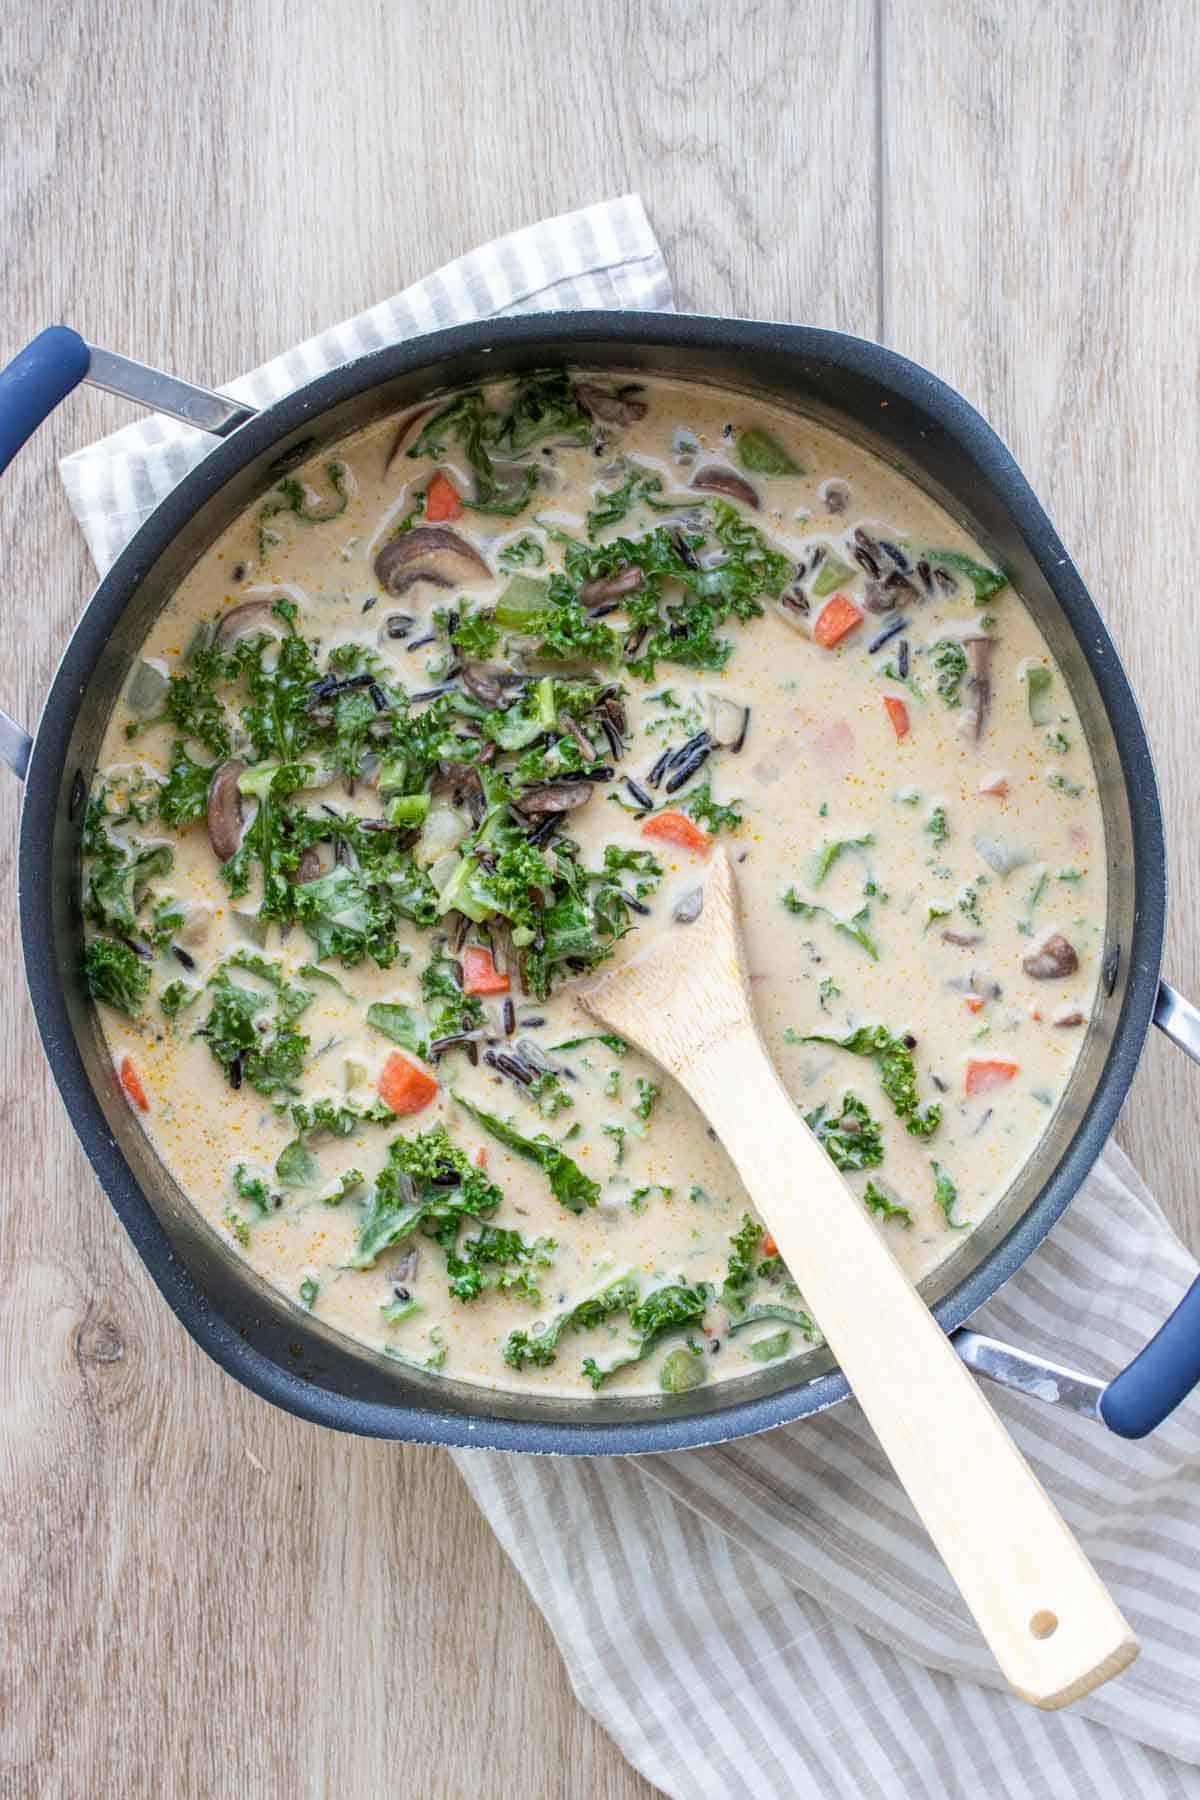 Top view of a black pot with a wooden spoon mixing a creamy soup with kale and veggies